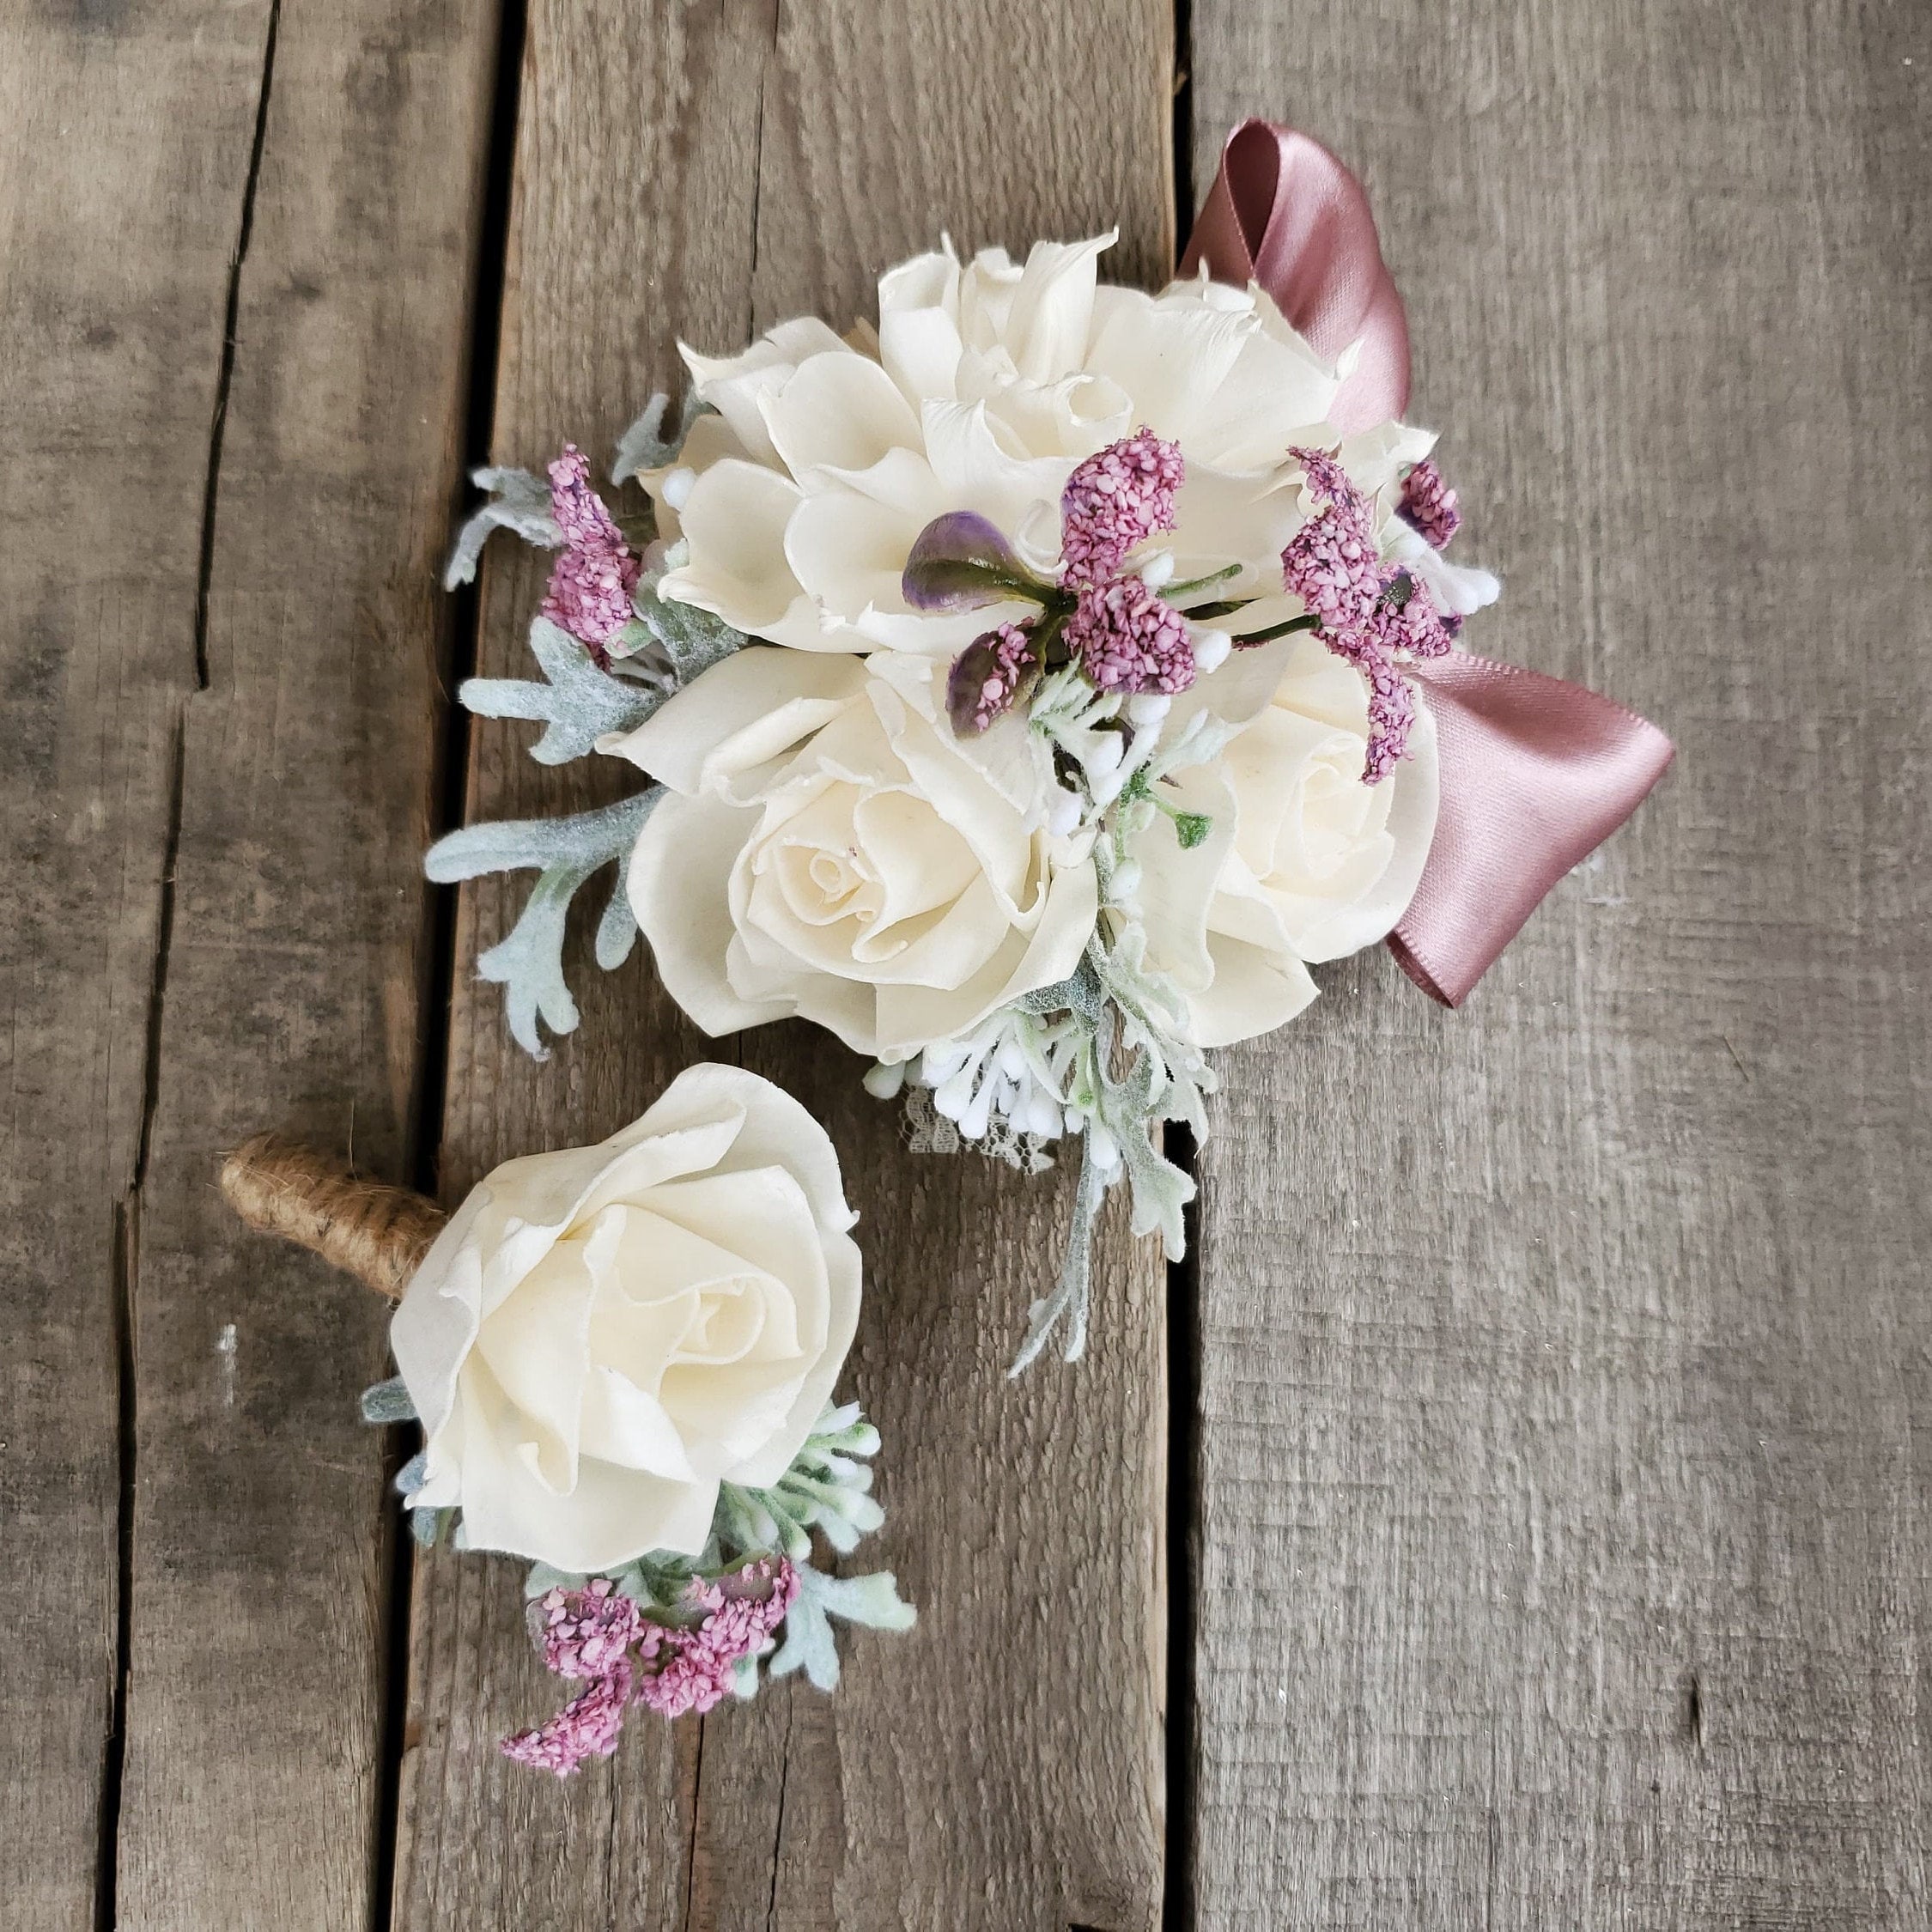 ROSE BOUTONNIERE AND CORSAGE SET Grinnell Florist - Bates Flowers by Design